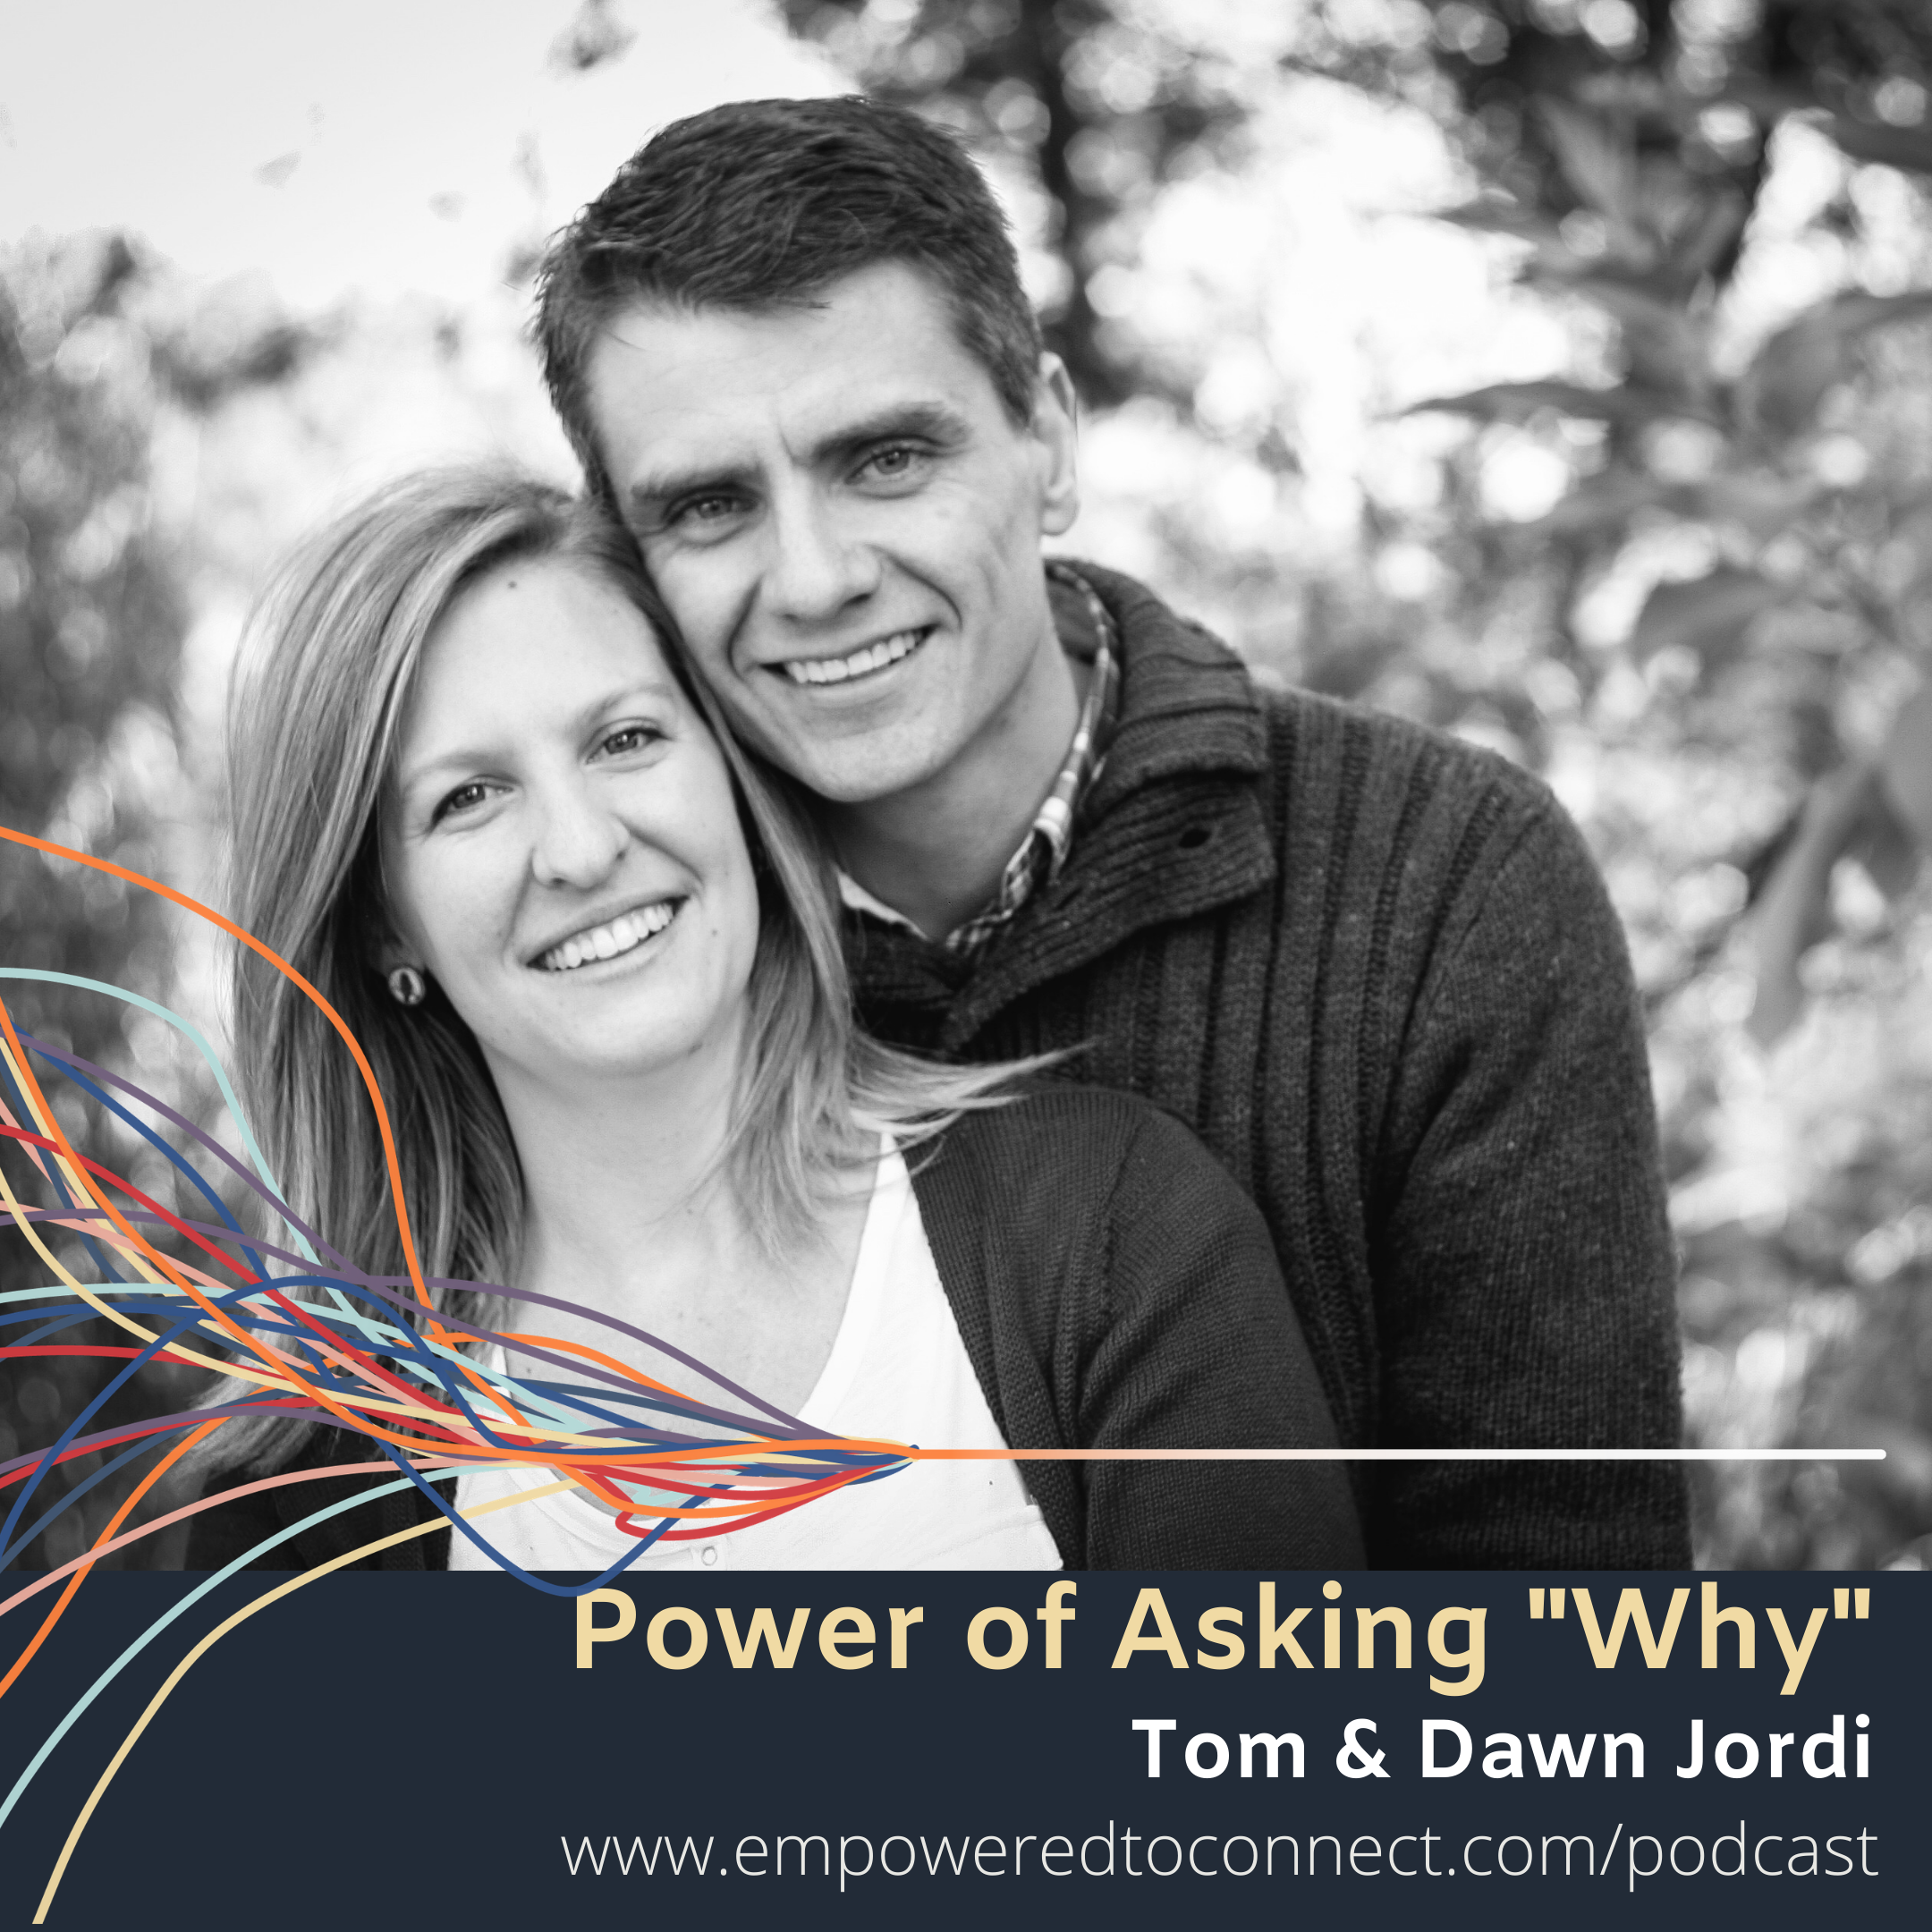 [E11] The Power of Asking Why with Tom and Dawn Jordi